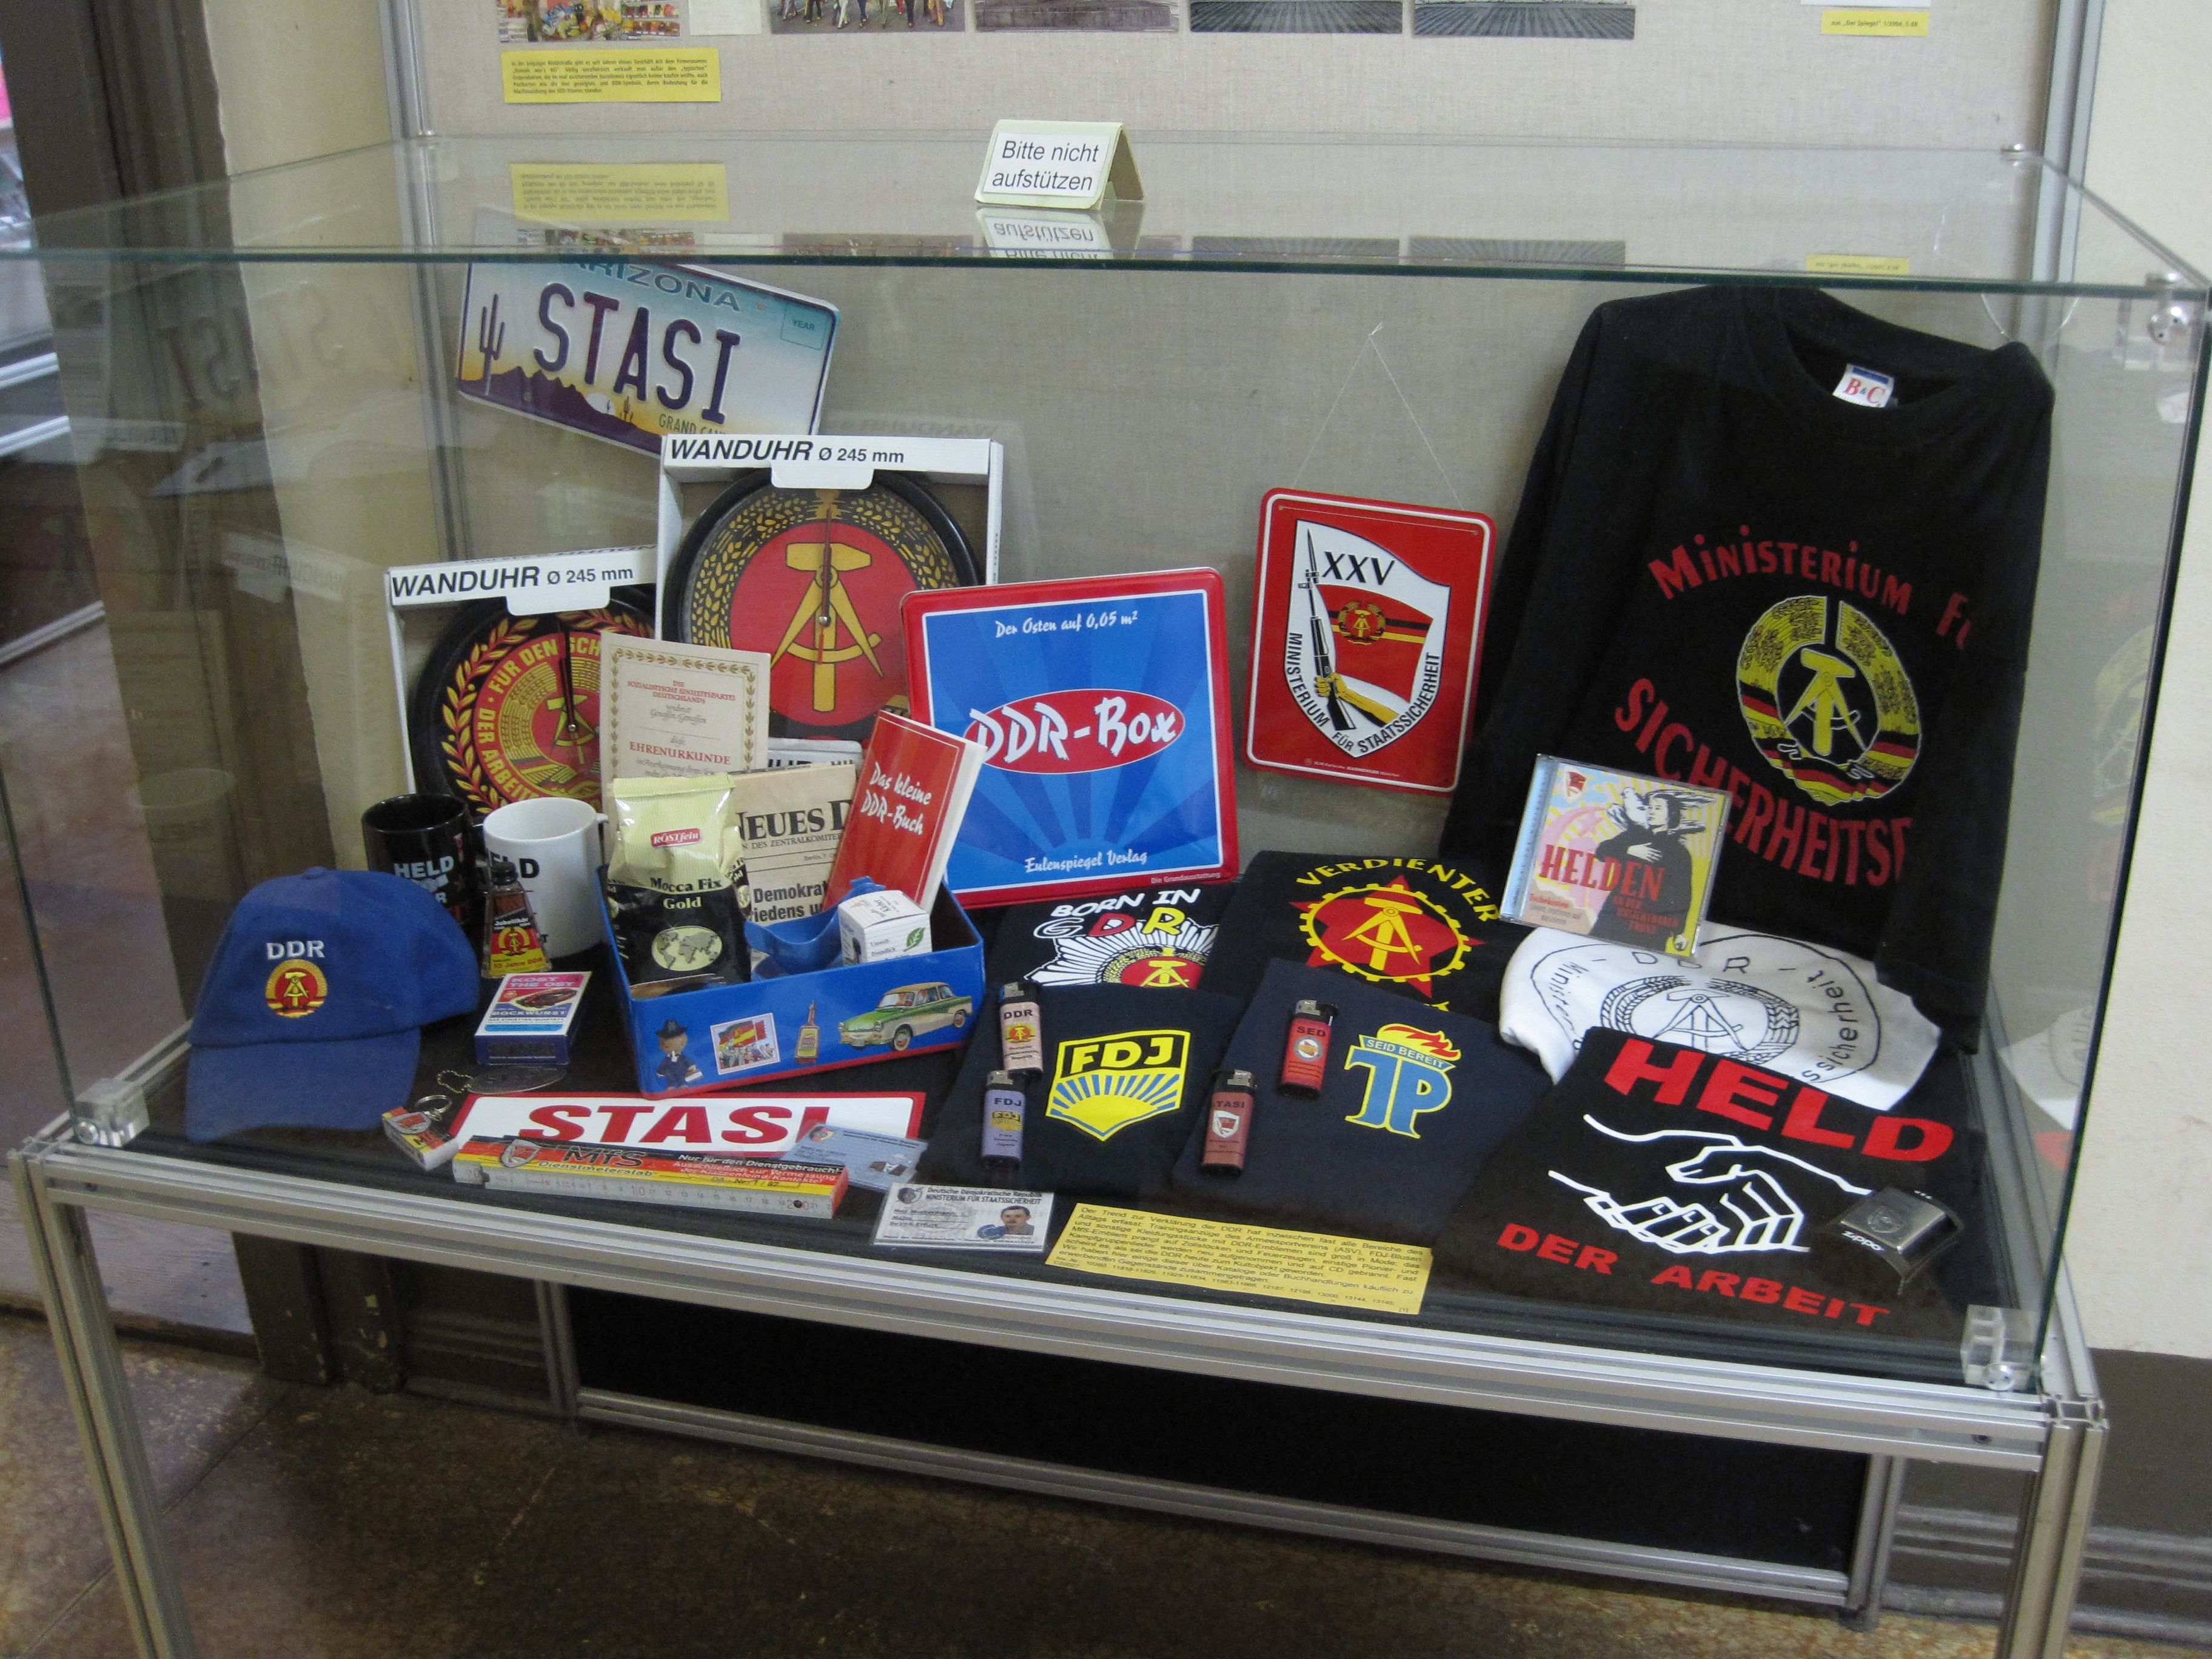 History and historical symbols can serve marketing purposes or be treated as “cult objects.” As such they can become the subject of historical exhibits. Thus, the “Runde Ecke” Memorial Museum in Leipzig exhibits a host of household objects with GDR emblems on them, describing them as “glorifying the GDR.” Photo: Irmgard Zündorf, “Runden Ecke” Memorial Museum, Leipzig 2011, License [https://creativecommons.org/licenses/by-nc/3.0/de/ CC BY-NC 3.0 DE]